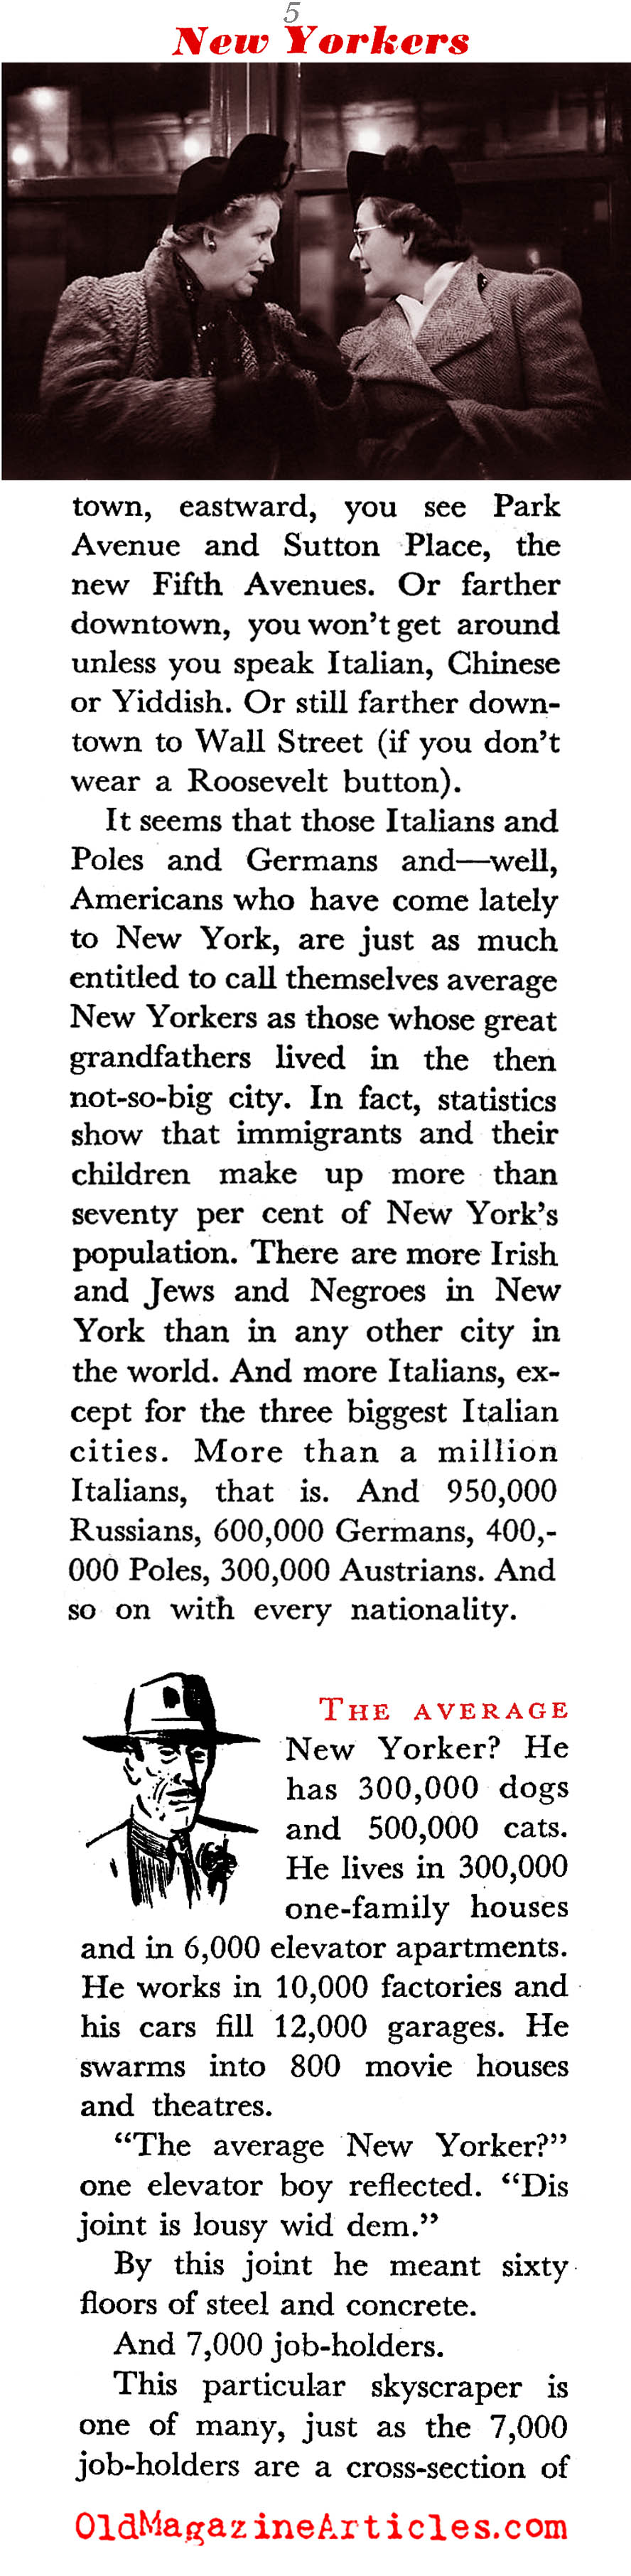 In Search of the Average New Yorker (Coronet Magazine, 1941)